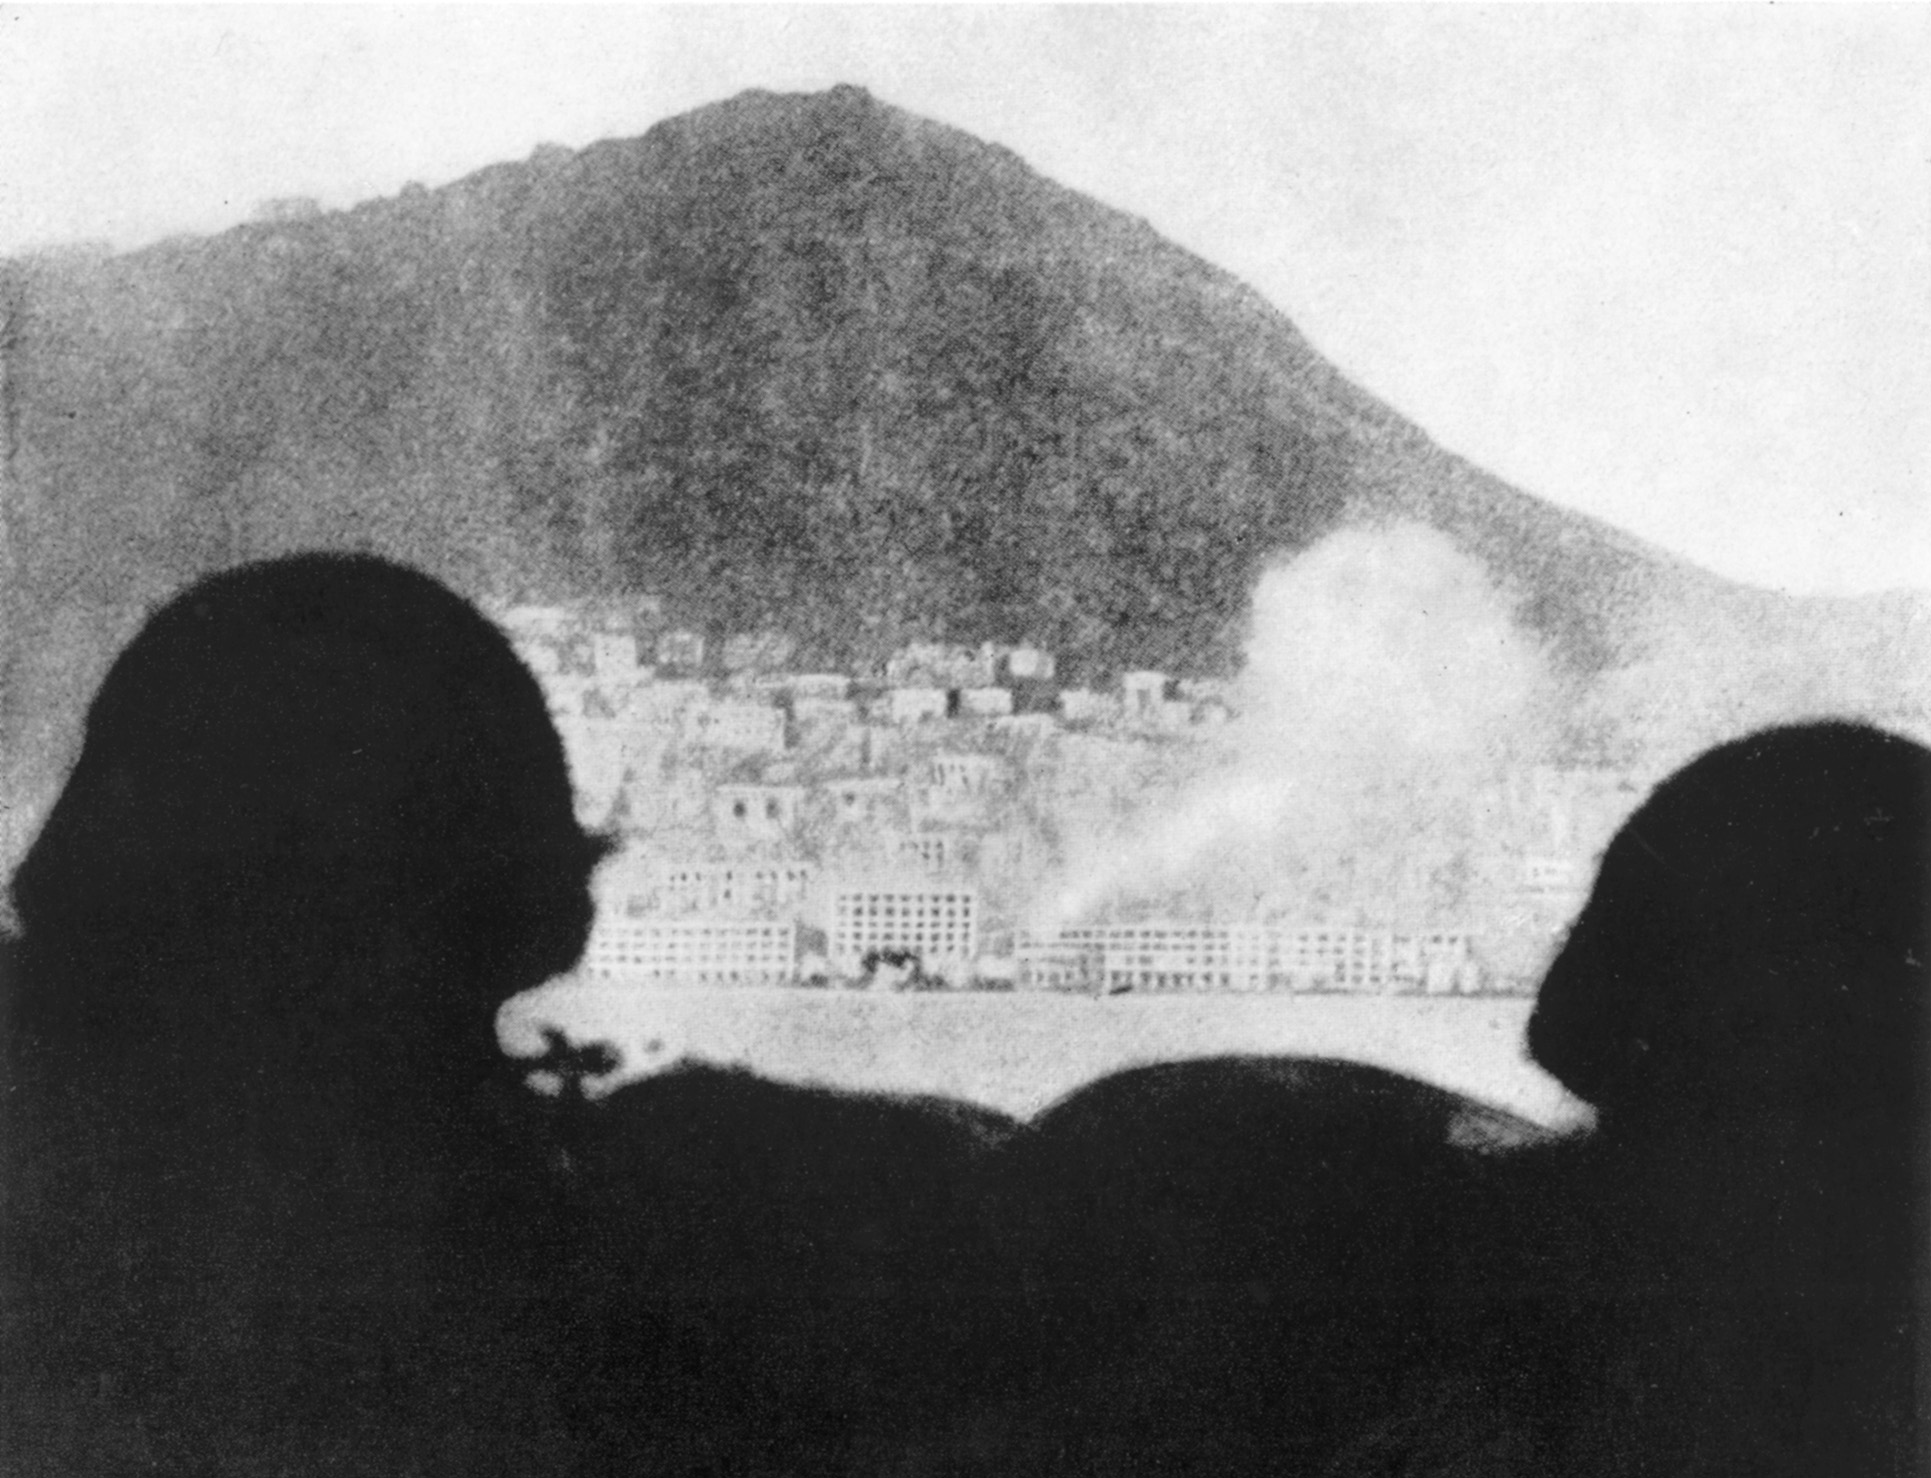 Japanese soldiers watch from Kowloon as their shells fall on Victoria.